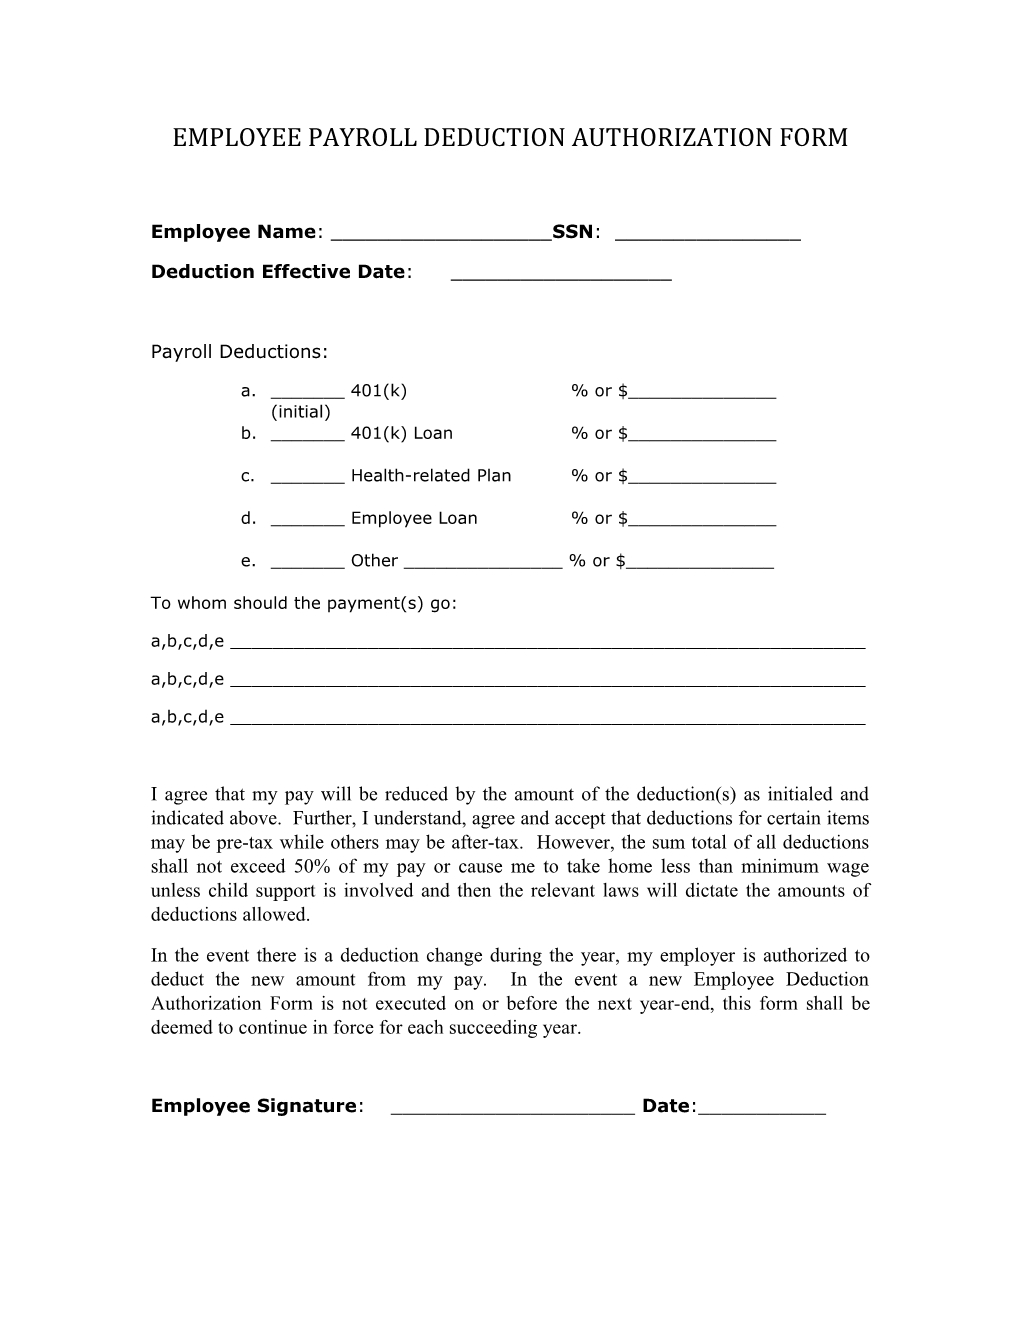 Employee Payroll Deduction Authorization Form